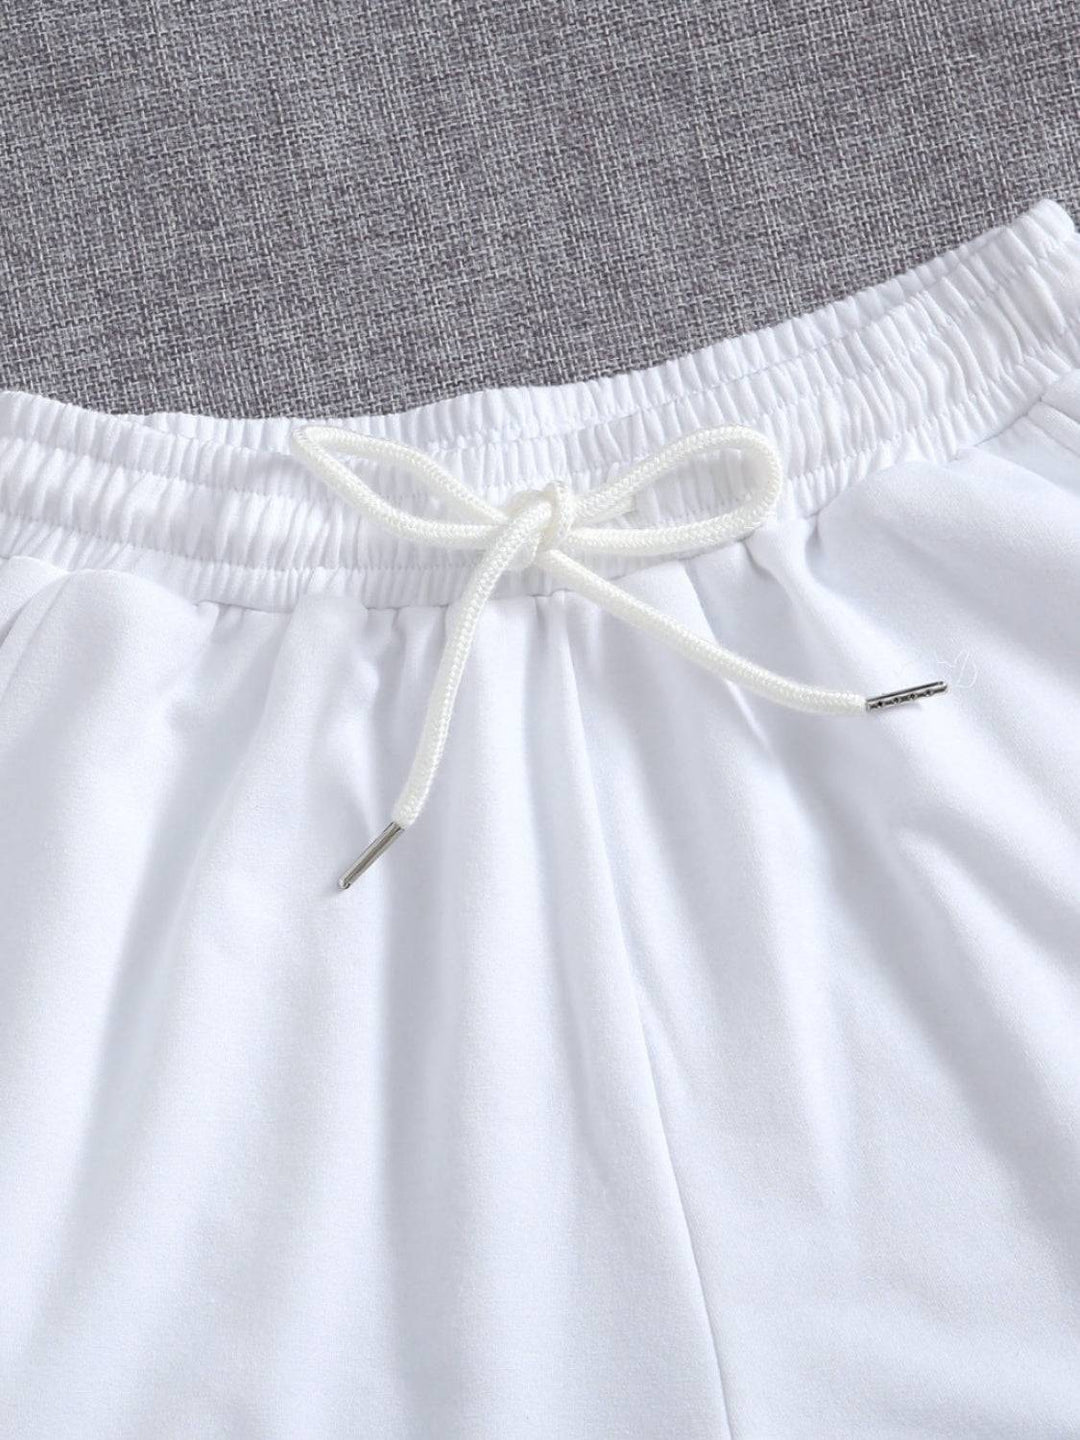 a close up of a pair of white shorts